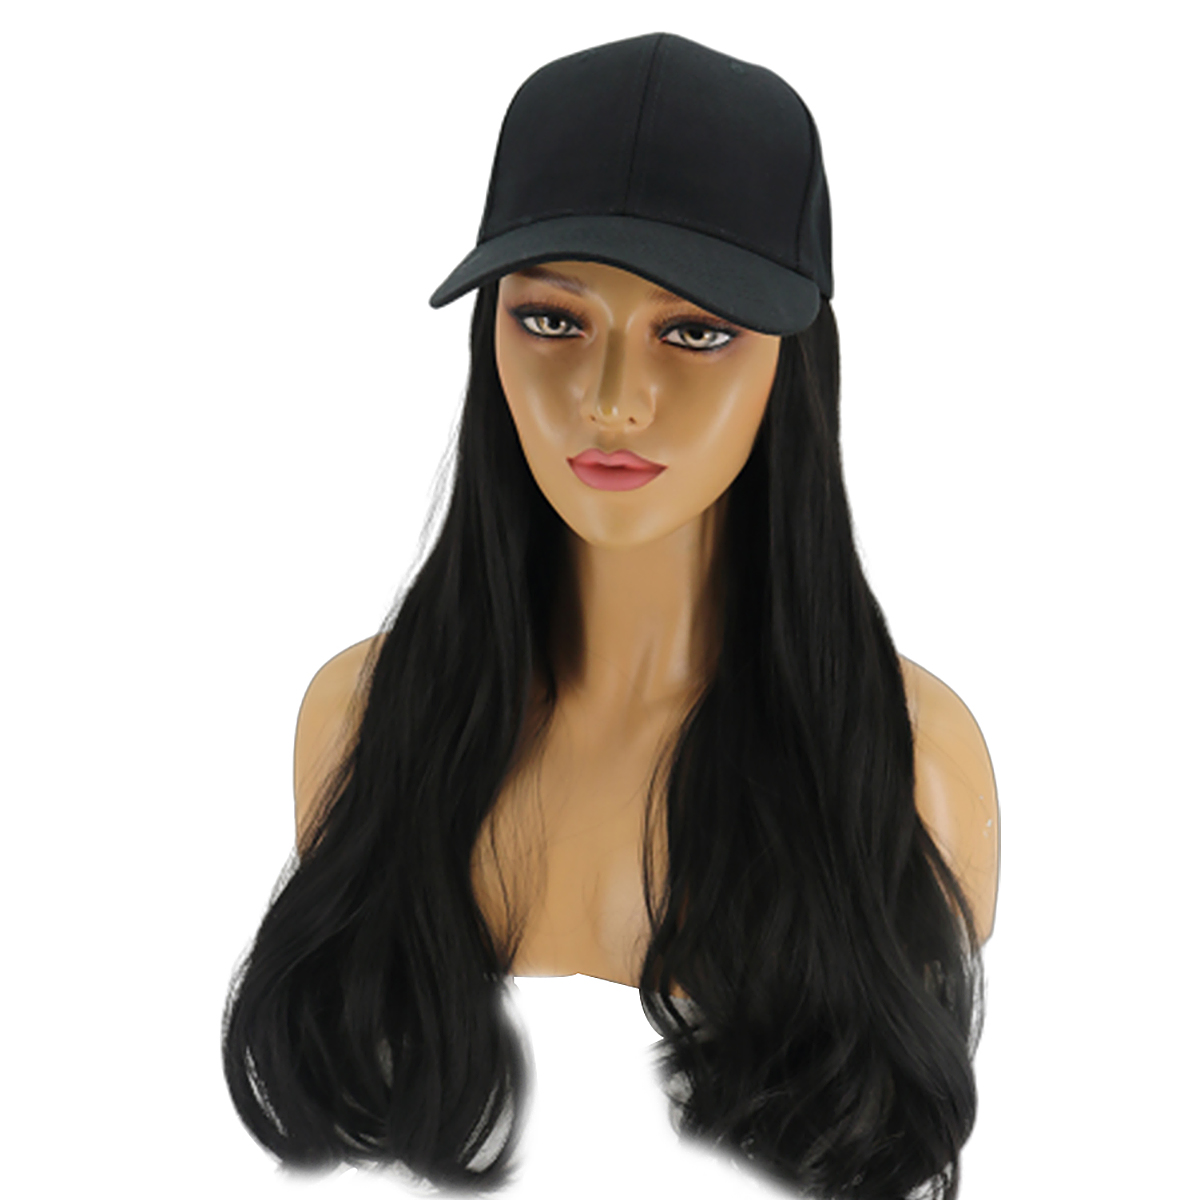 Women Long Curly Fashion Baseball Cap Wig with Hat Cosplay Halloween ...